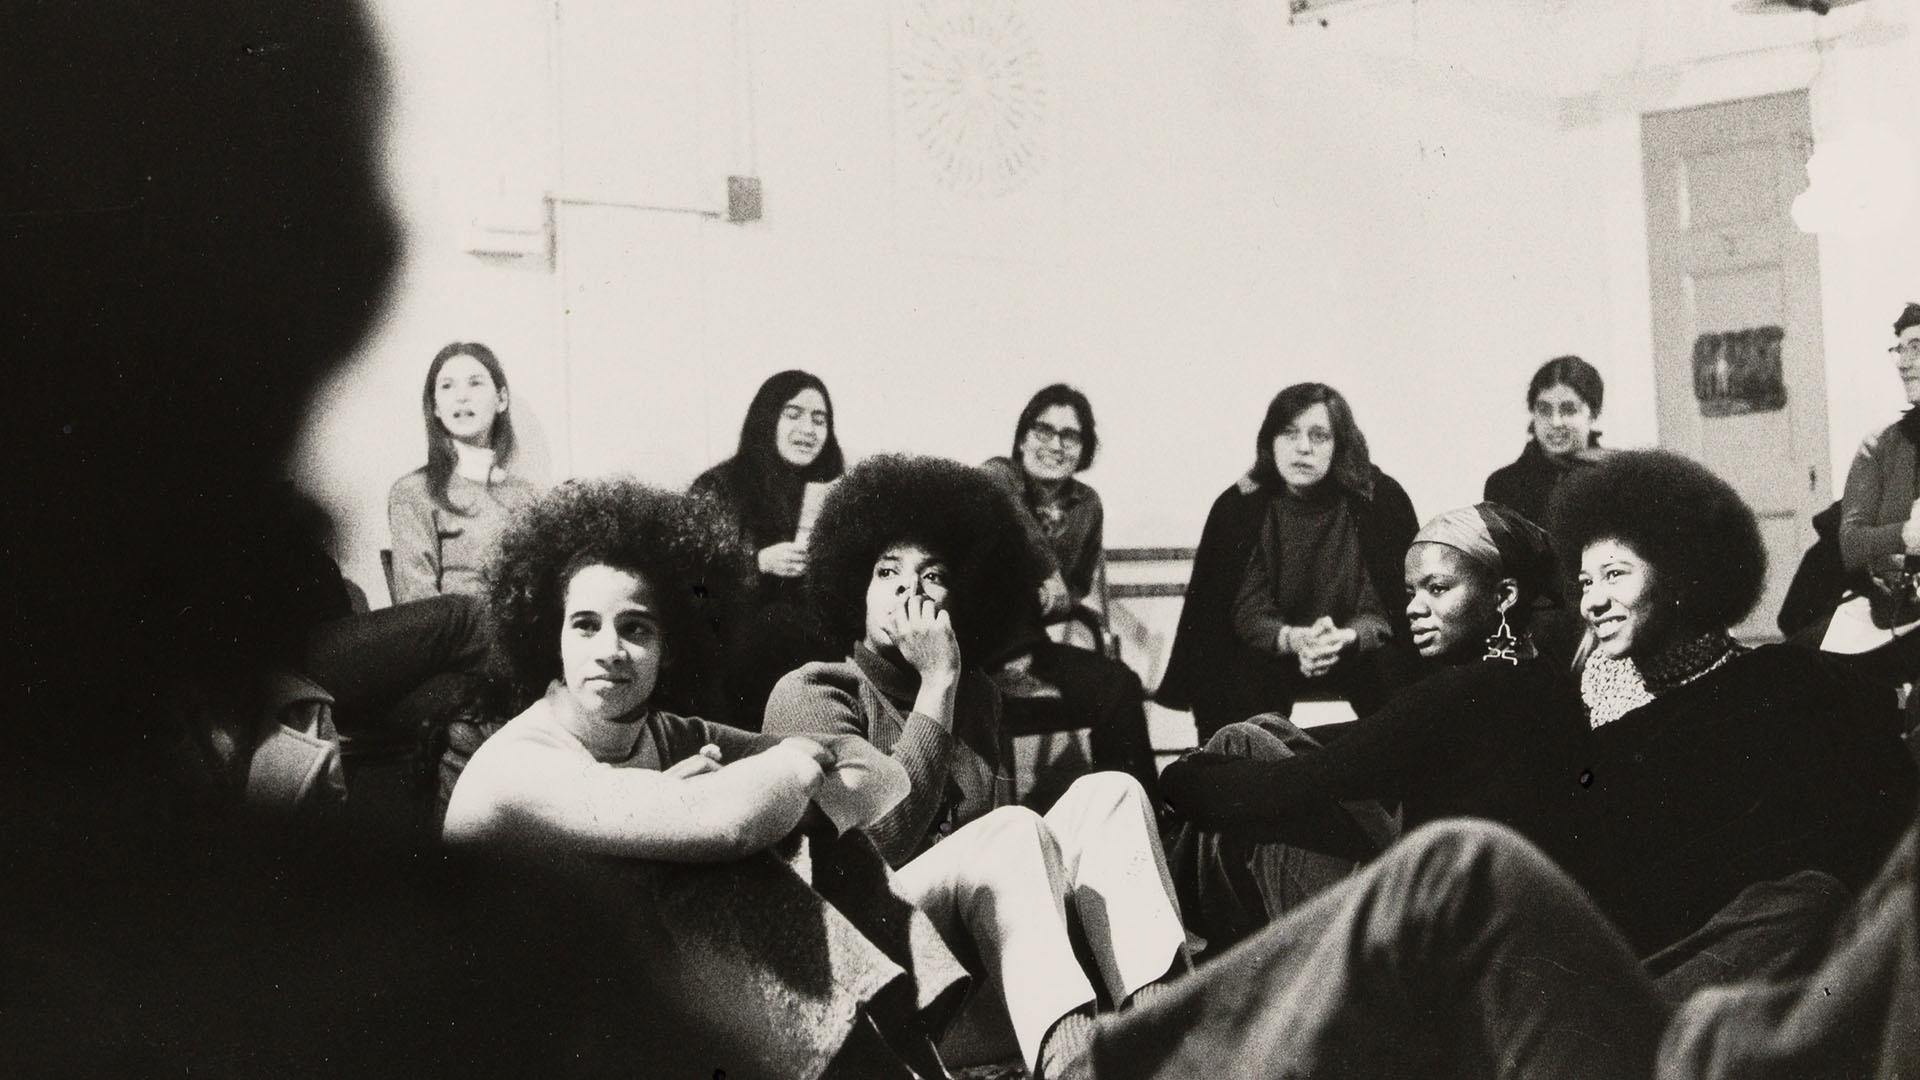 One of the many “consciousness raising” groups organized by women, circa 1970.